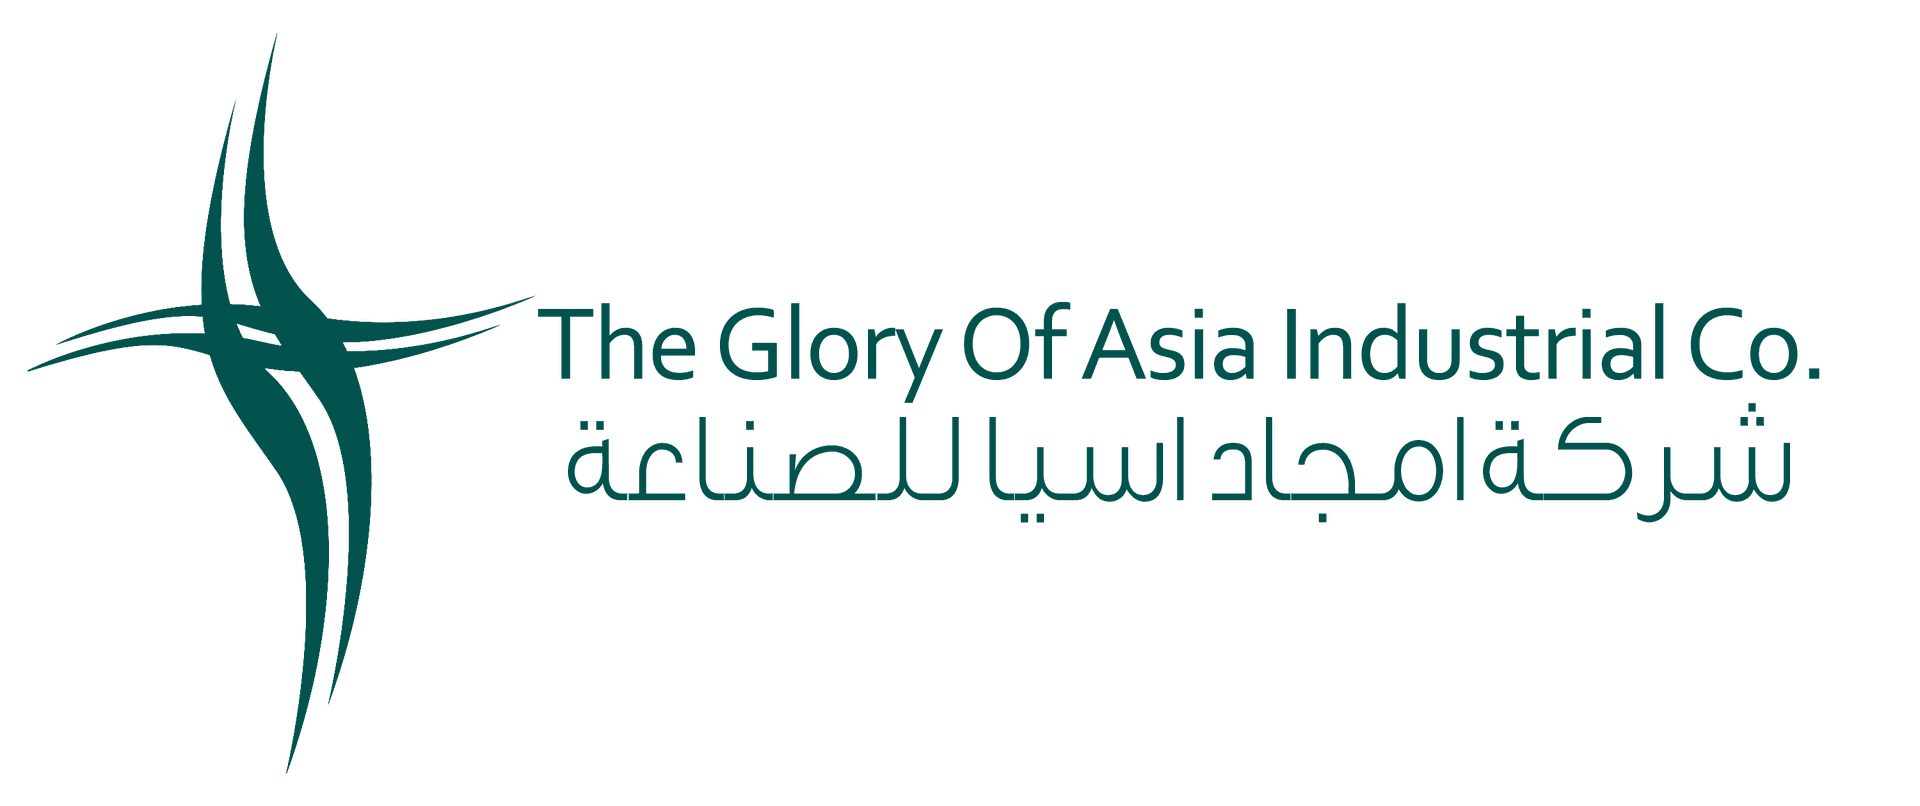 The Glory of Asia Industrial Company